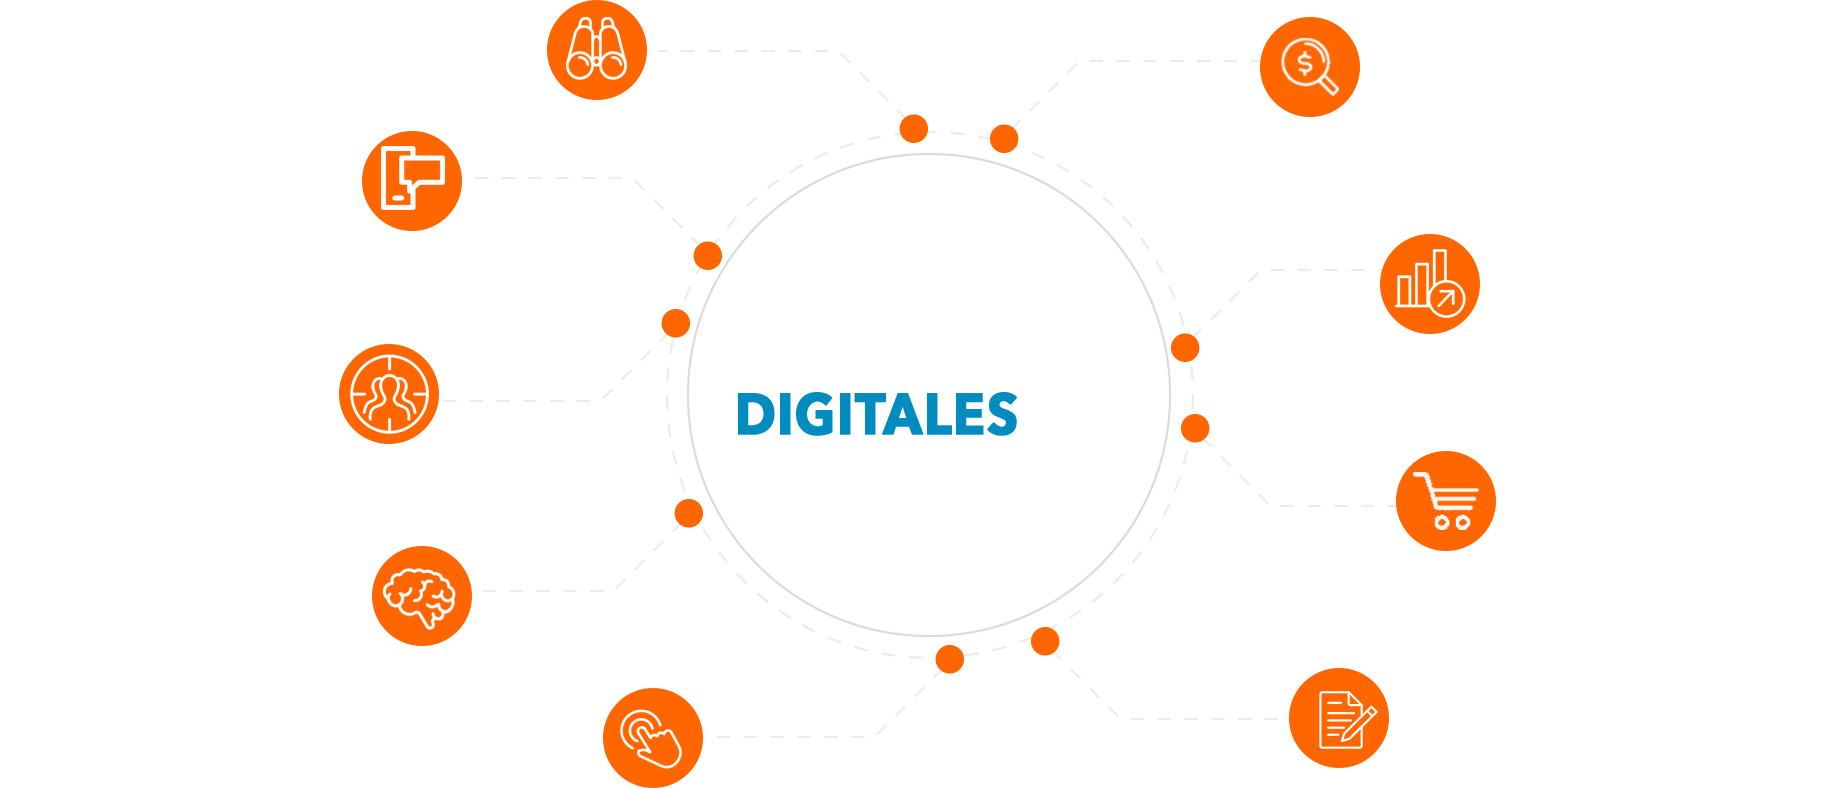 Solutions Digitales : Co-sponsoring, MediaBuying, Emailing, Bulk, Leads, Co-registration, SMS, Consulting